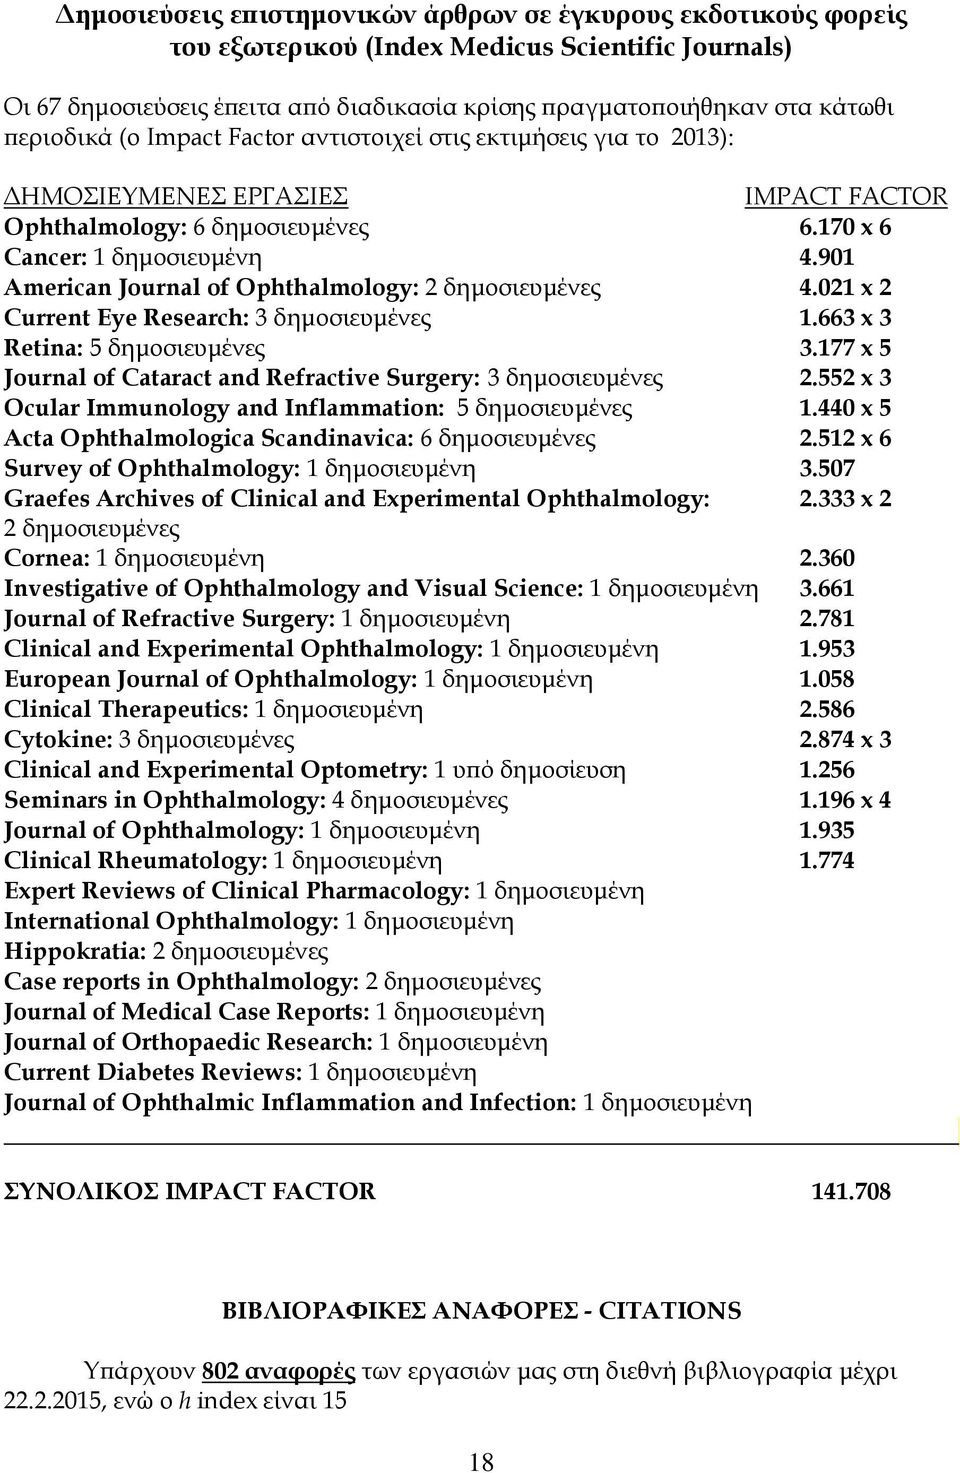 901 American Journal of Ophthalmology: 2 δημοσιευμένες 4.021 x 2 Current Eye Research: 3 δημοσιευμένες 1.663 x 3 Retina: 5 δημοσιευμένες 3.